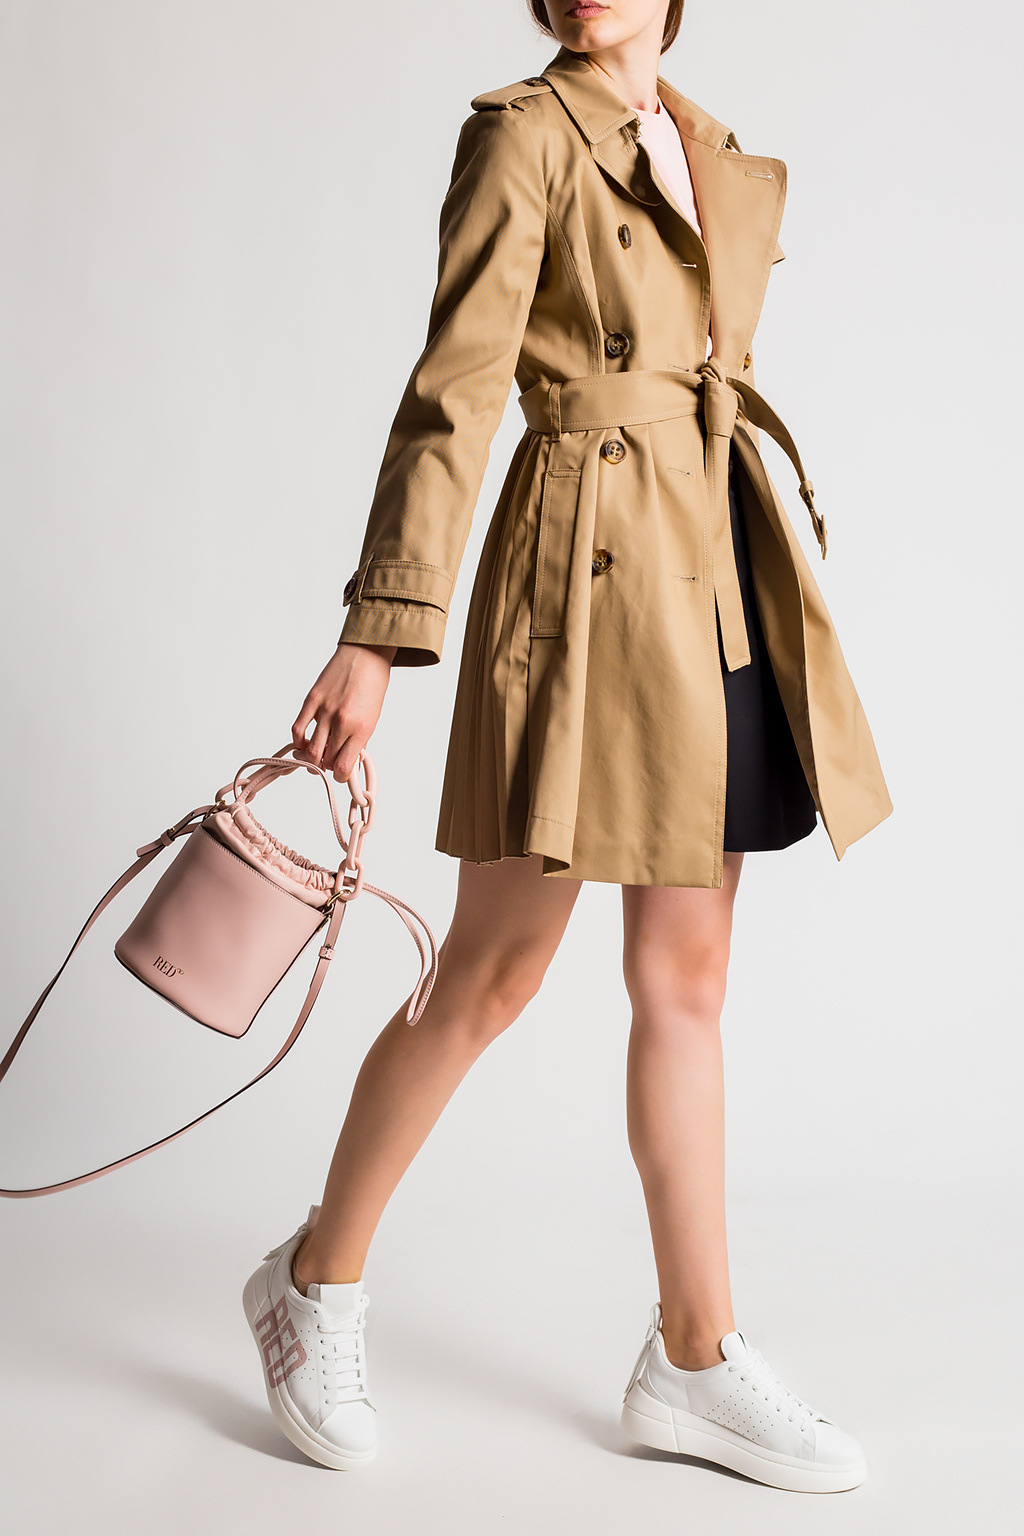 Red Valentino Double-breasted trench coat | Women's Clothing | Vitkac